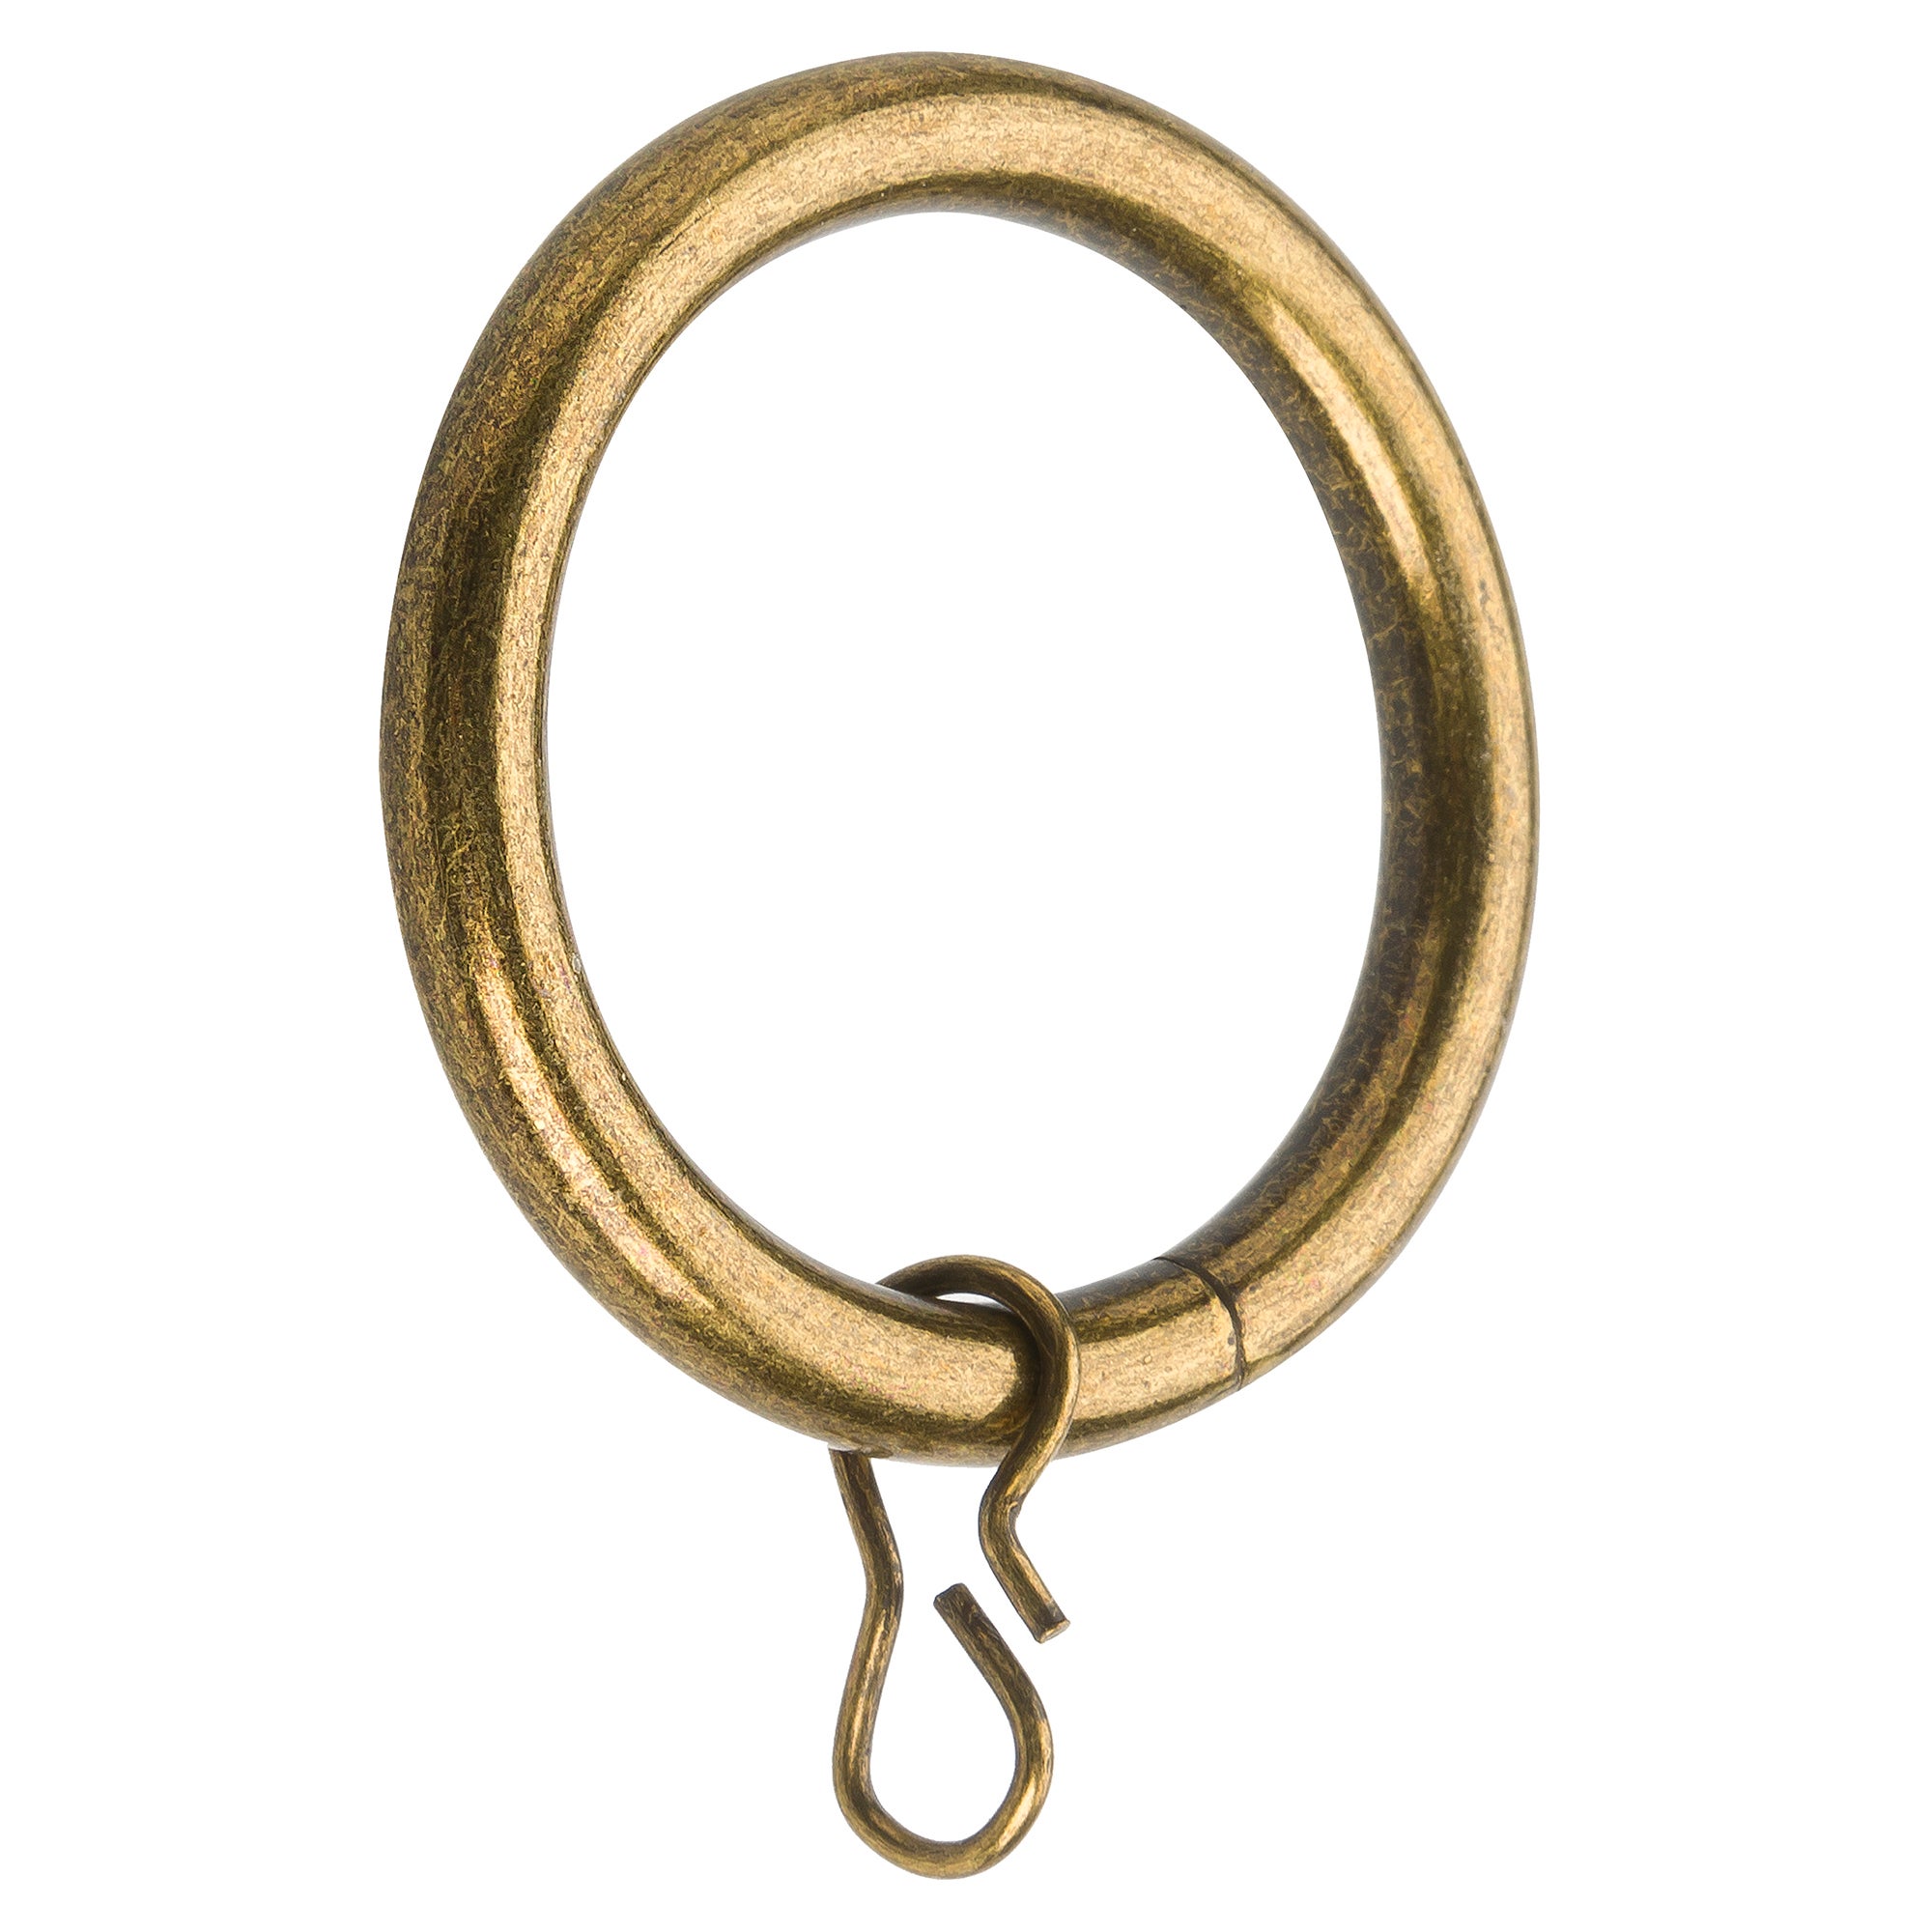 Mix And Match Pack Of 6 Metal Curtain Rings Antique Brass